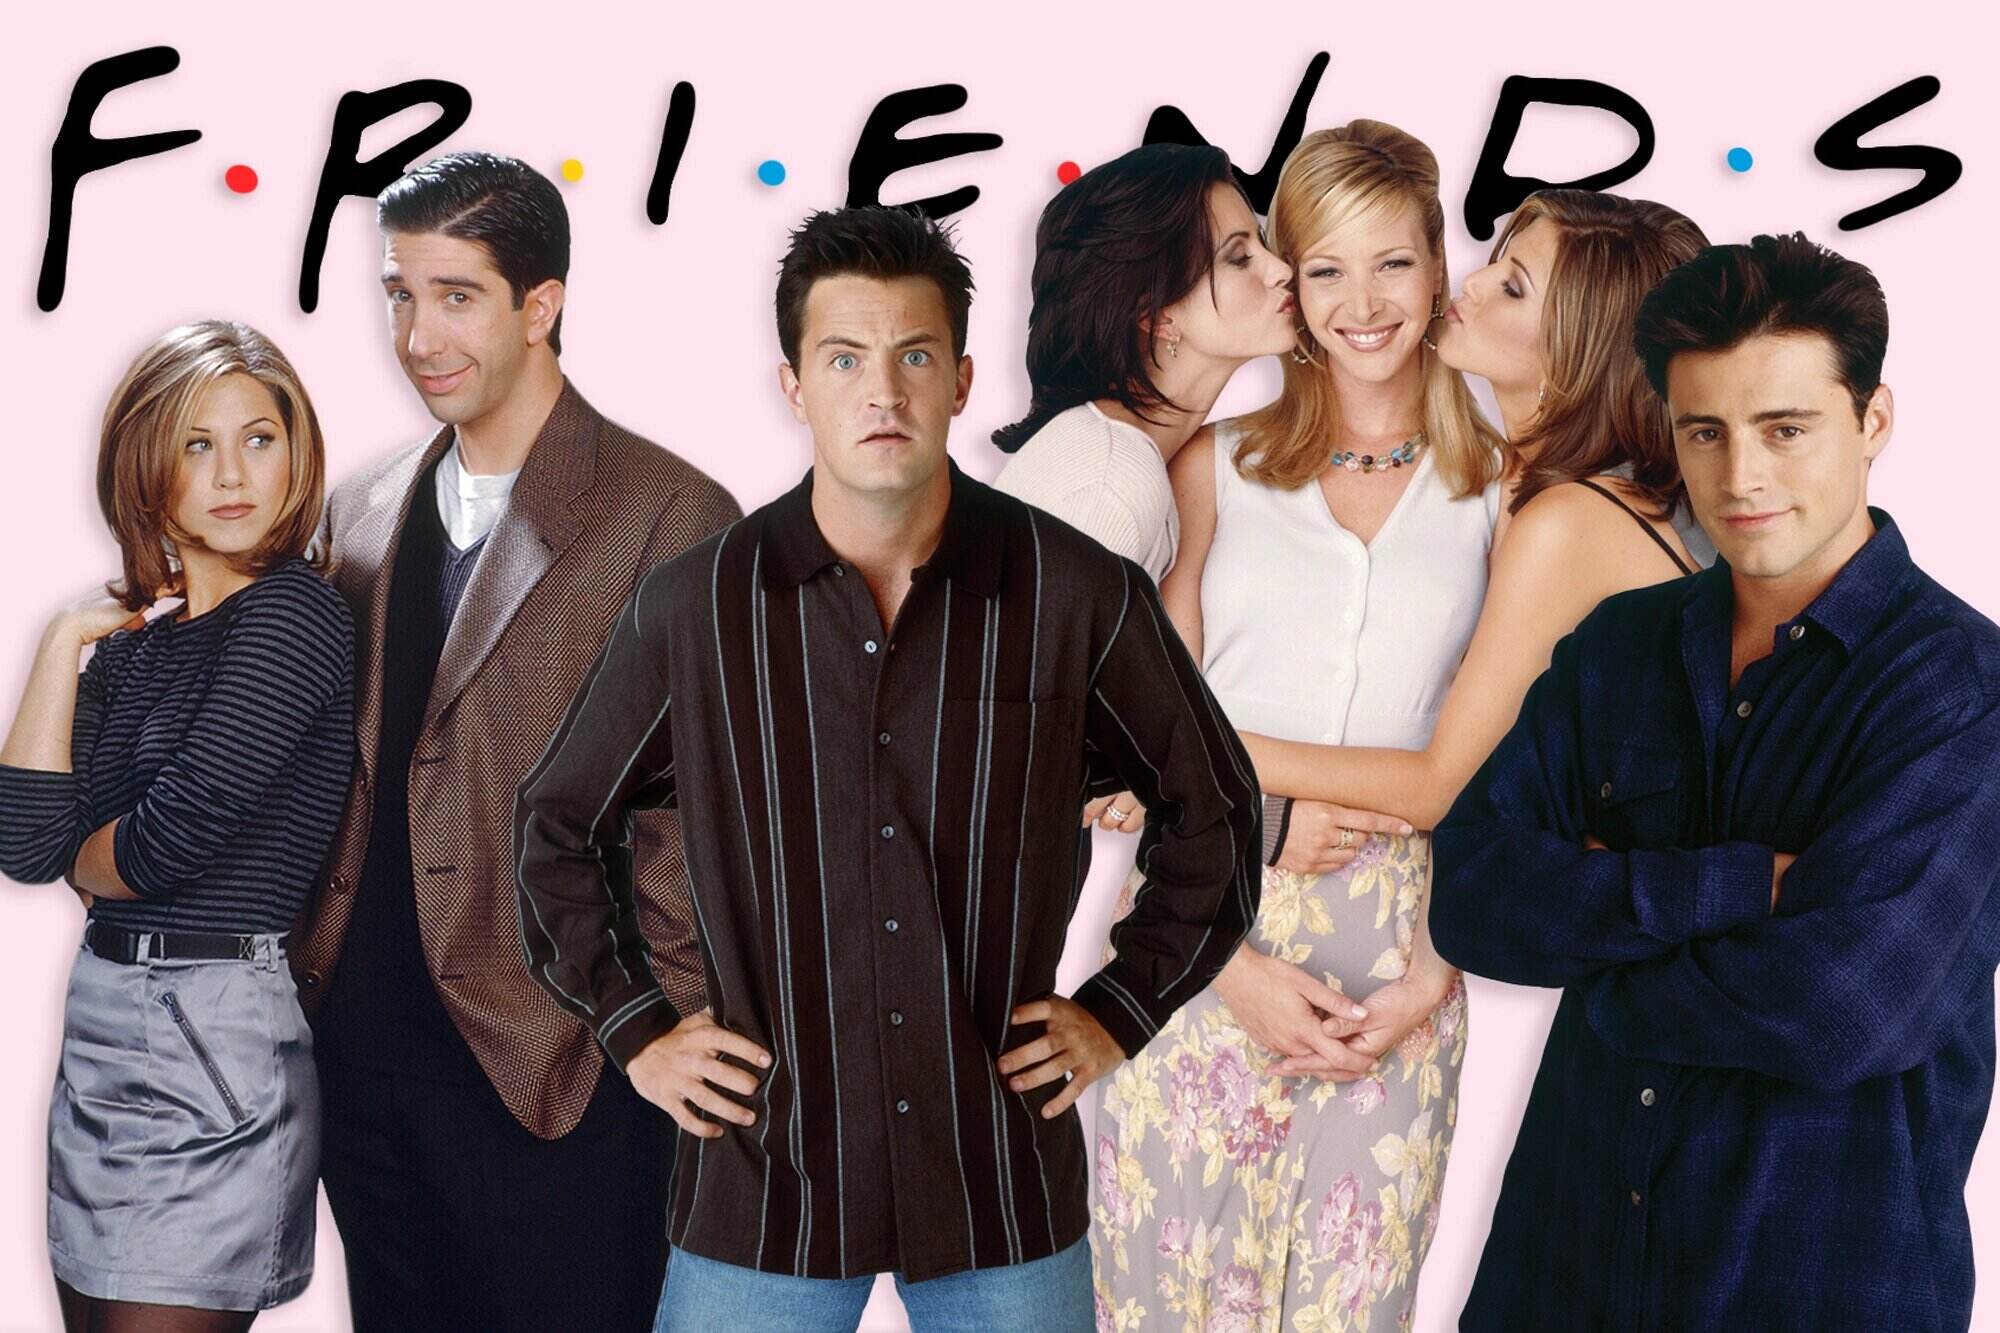 14-extraordinary-facts-about-friends